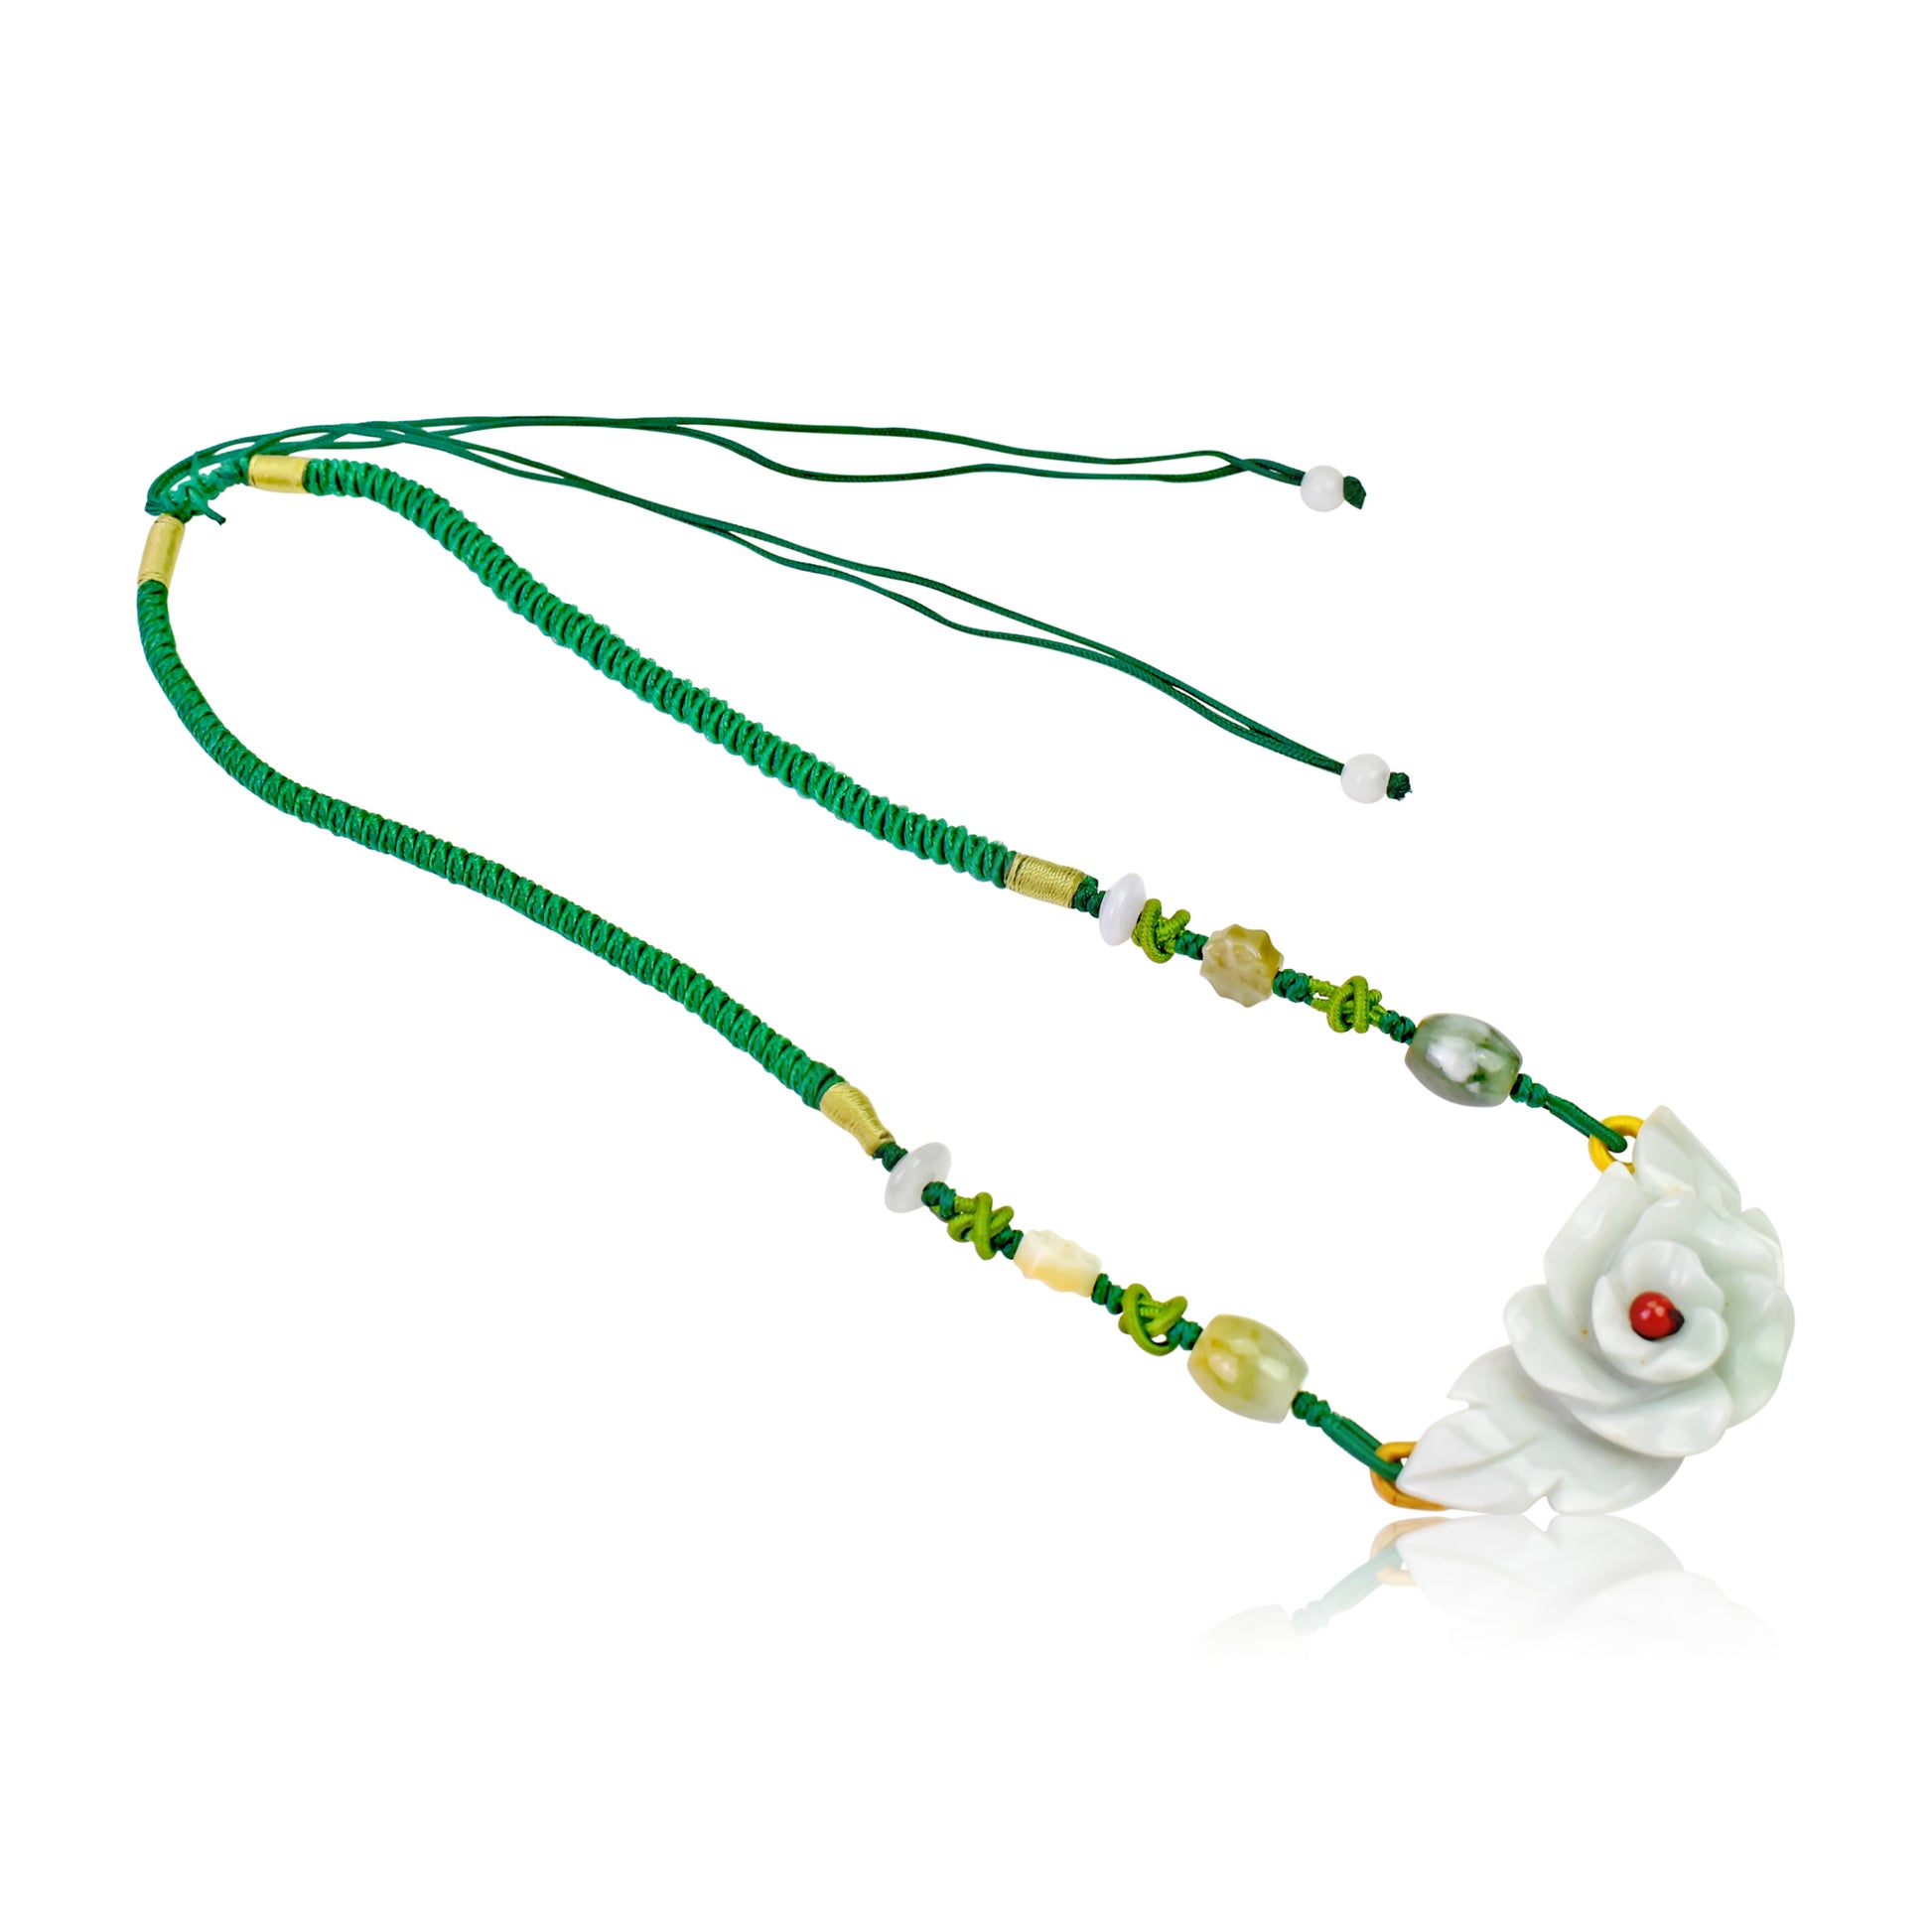 Get Your Love Story Started with Rose Jade Necklace made with Green Cord